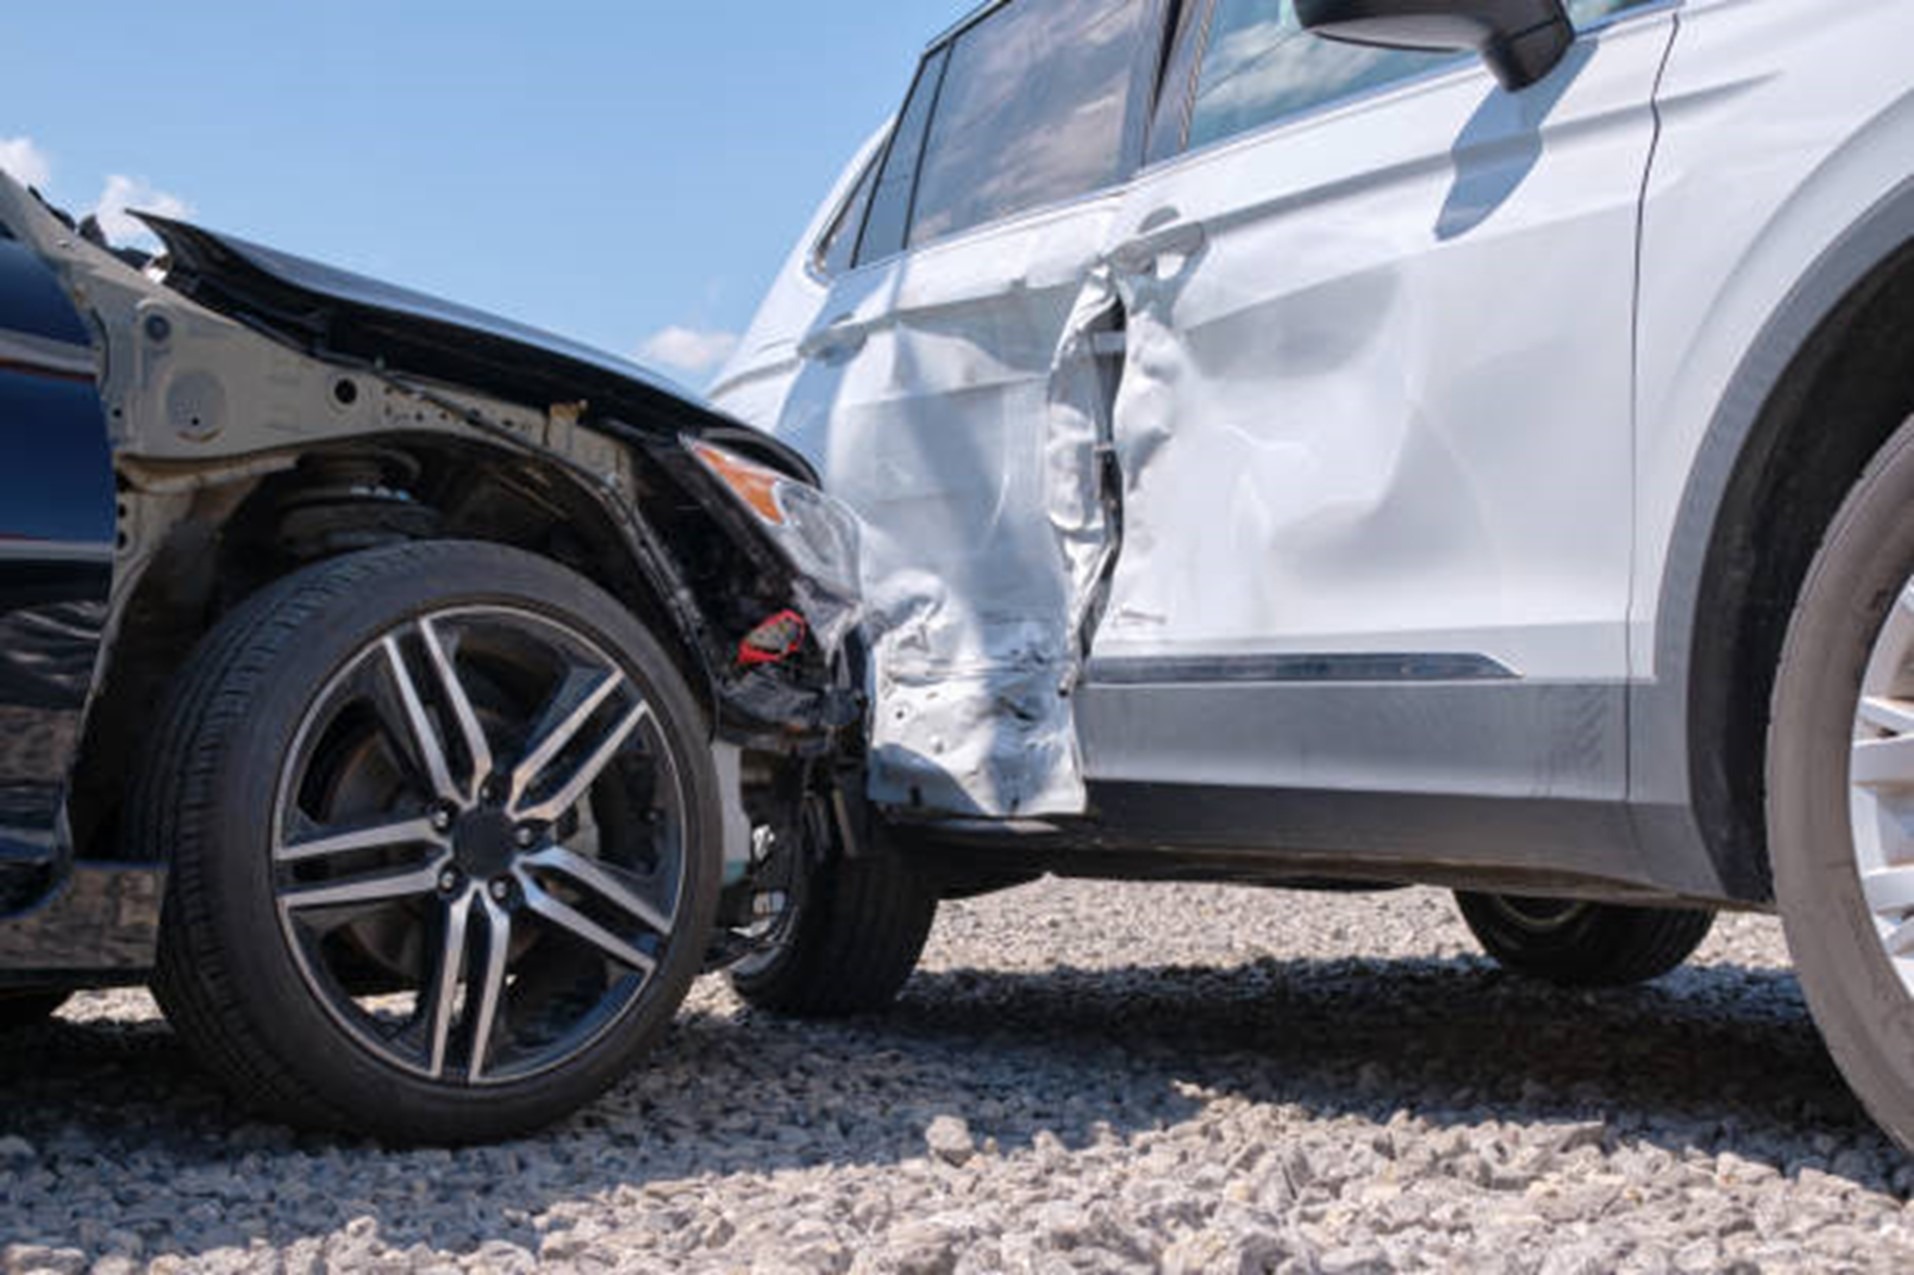 car Accident Lawyer can help you